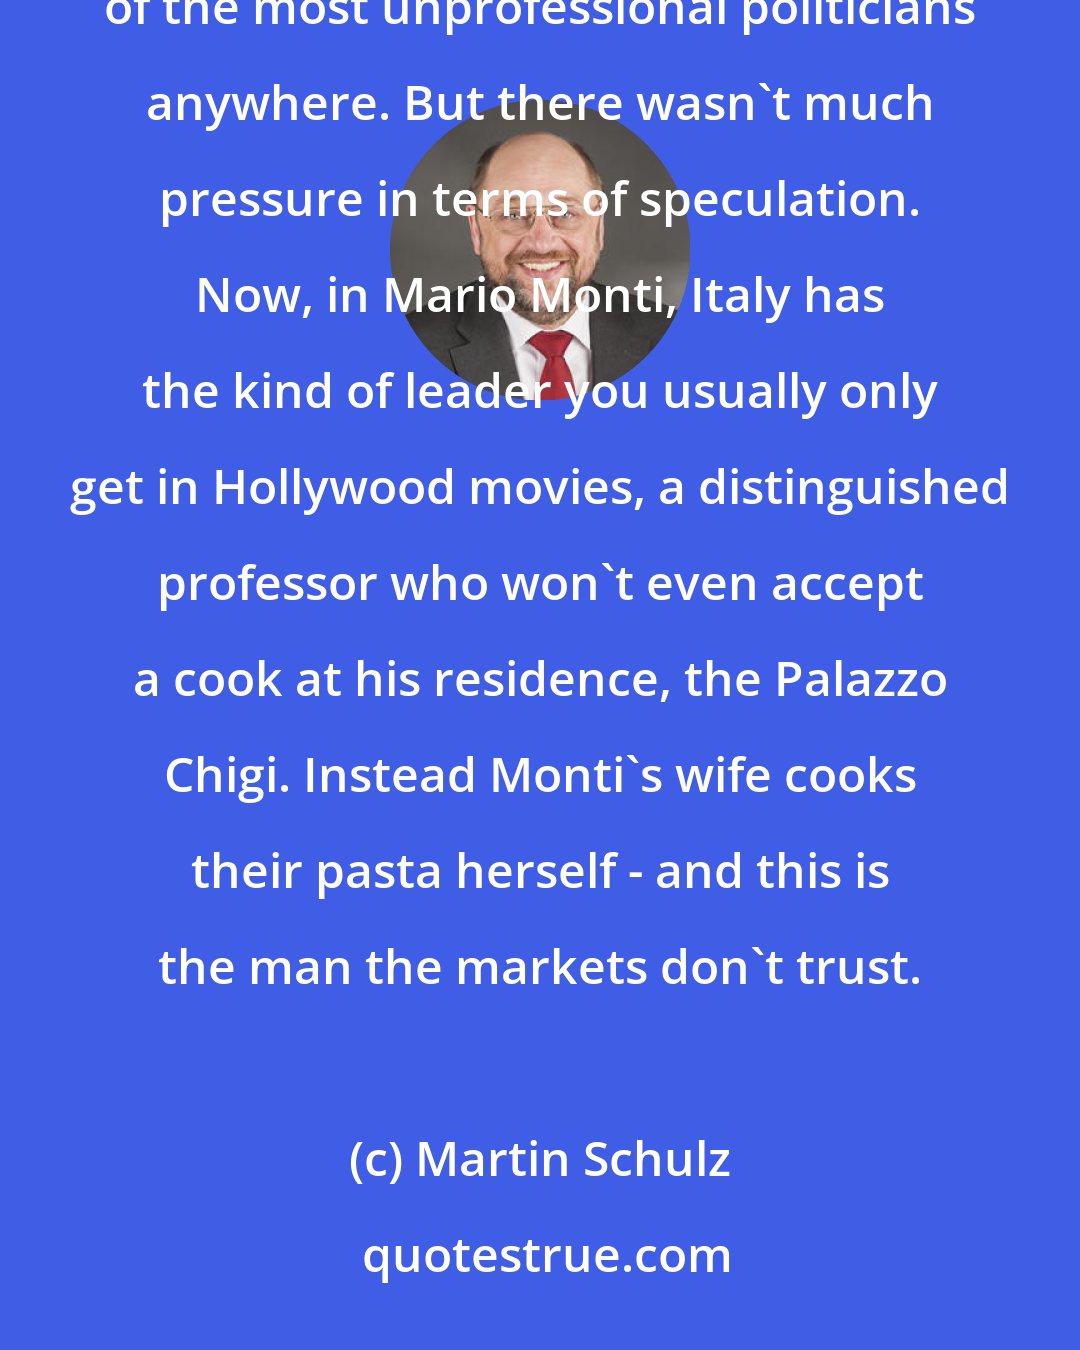 Martin Schulz: There you see how absurd the reactions of the so-called markets are. For a long time, Italy was run by one of the most unprofessional politicians anywhere. But there wasn't much pressure in terms of speculation. Now, in Mario Monti, Italy has the kind of leader you usually only get in Hollywood movies, a distinguished professor who won't even accept a cook at his residence, the Palazzo Chigi. Instead Monti's wife cooks their pasta herself - and this is the man the markets don't trust.